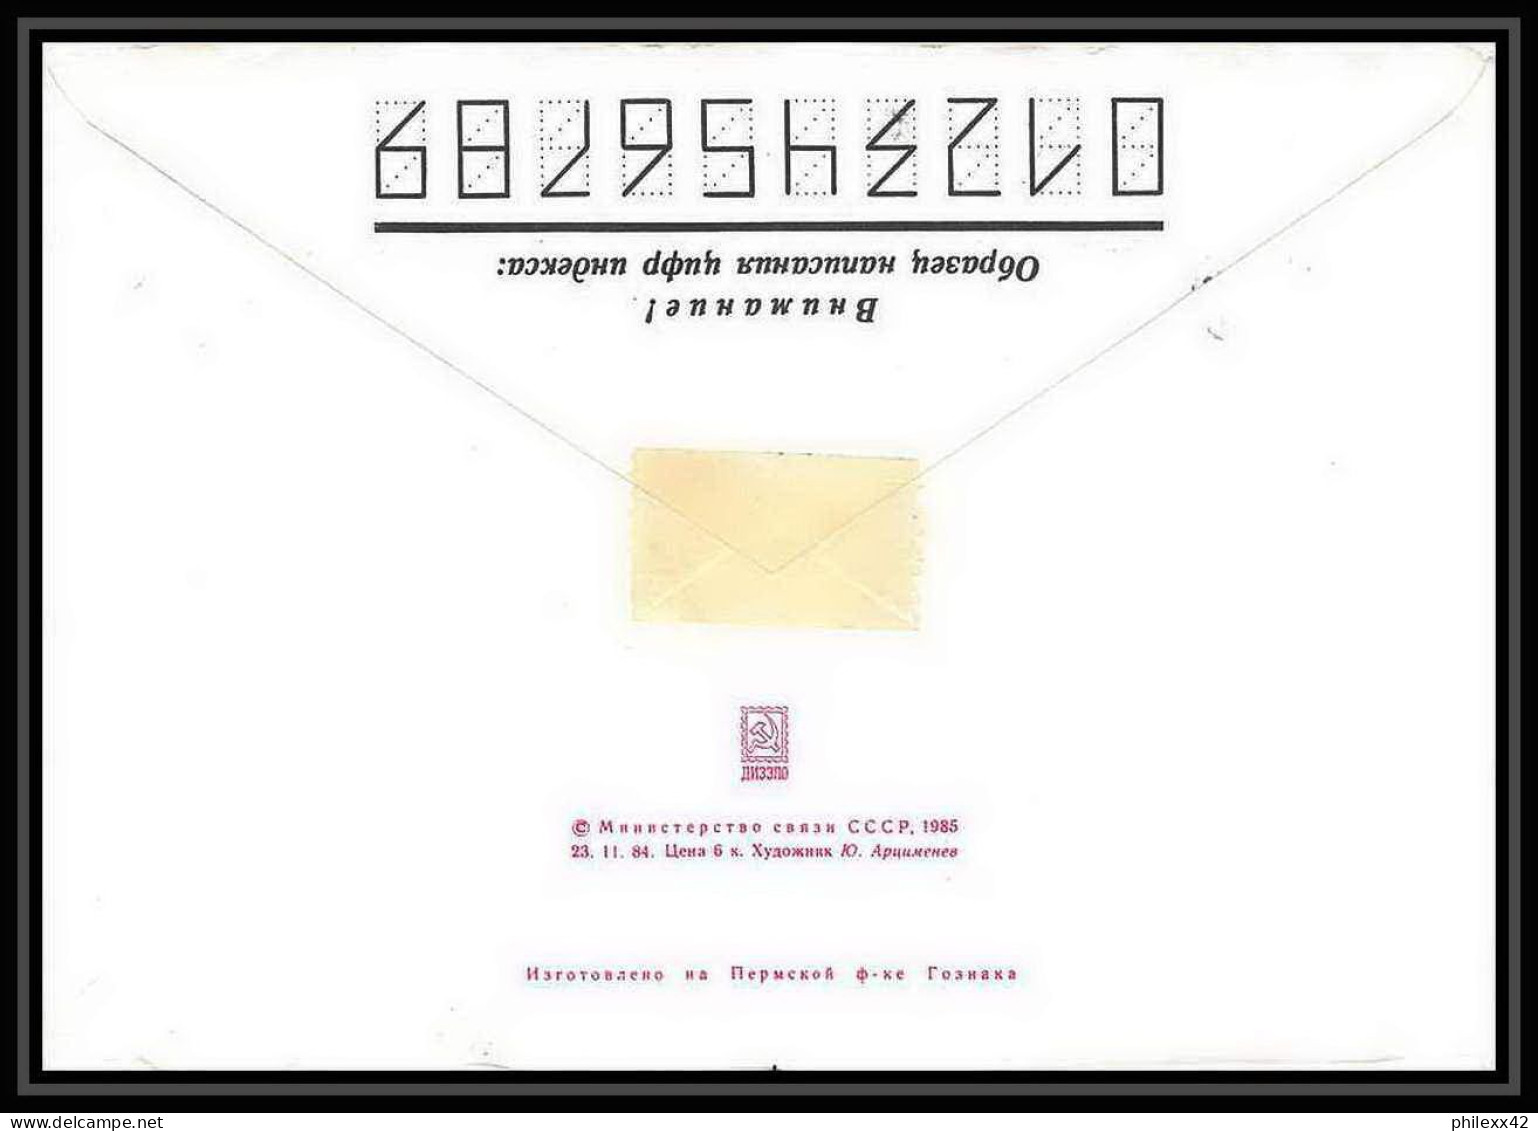 9256/ Espace (space Raumfahrt) Entier Postal (Stamped Stationery) 4/4/1986 (Russia Urss USSR) - Rusia & URSS